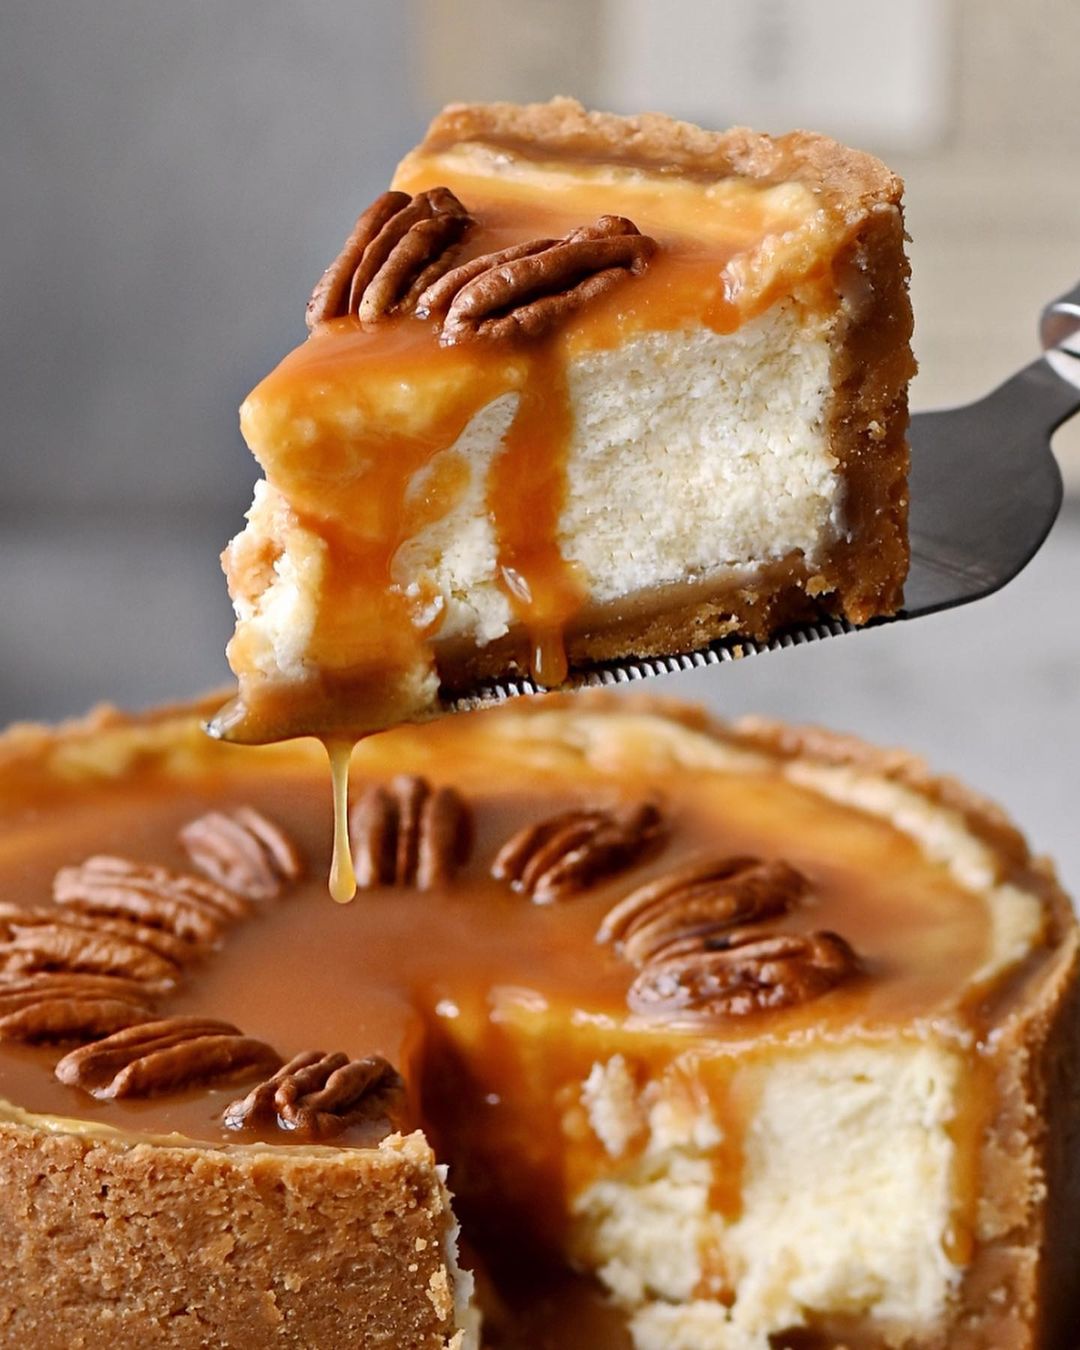 Fluffy cheesecake with salted caramel and pecan nuts